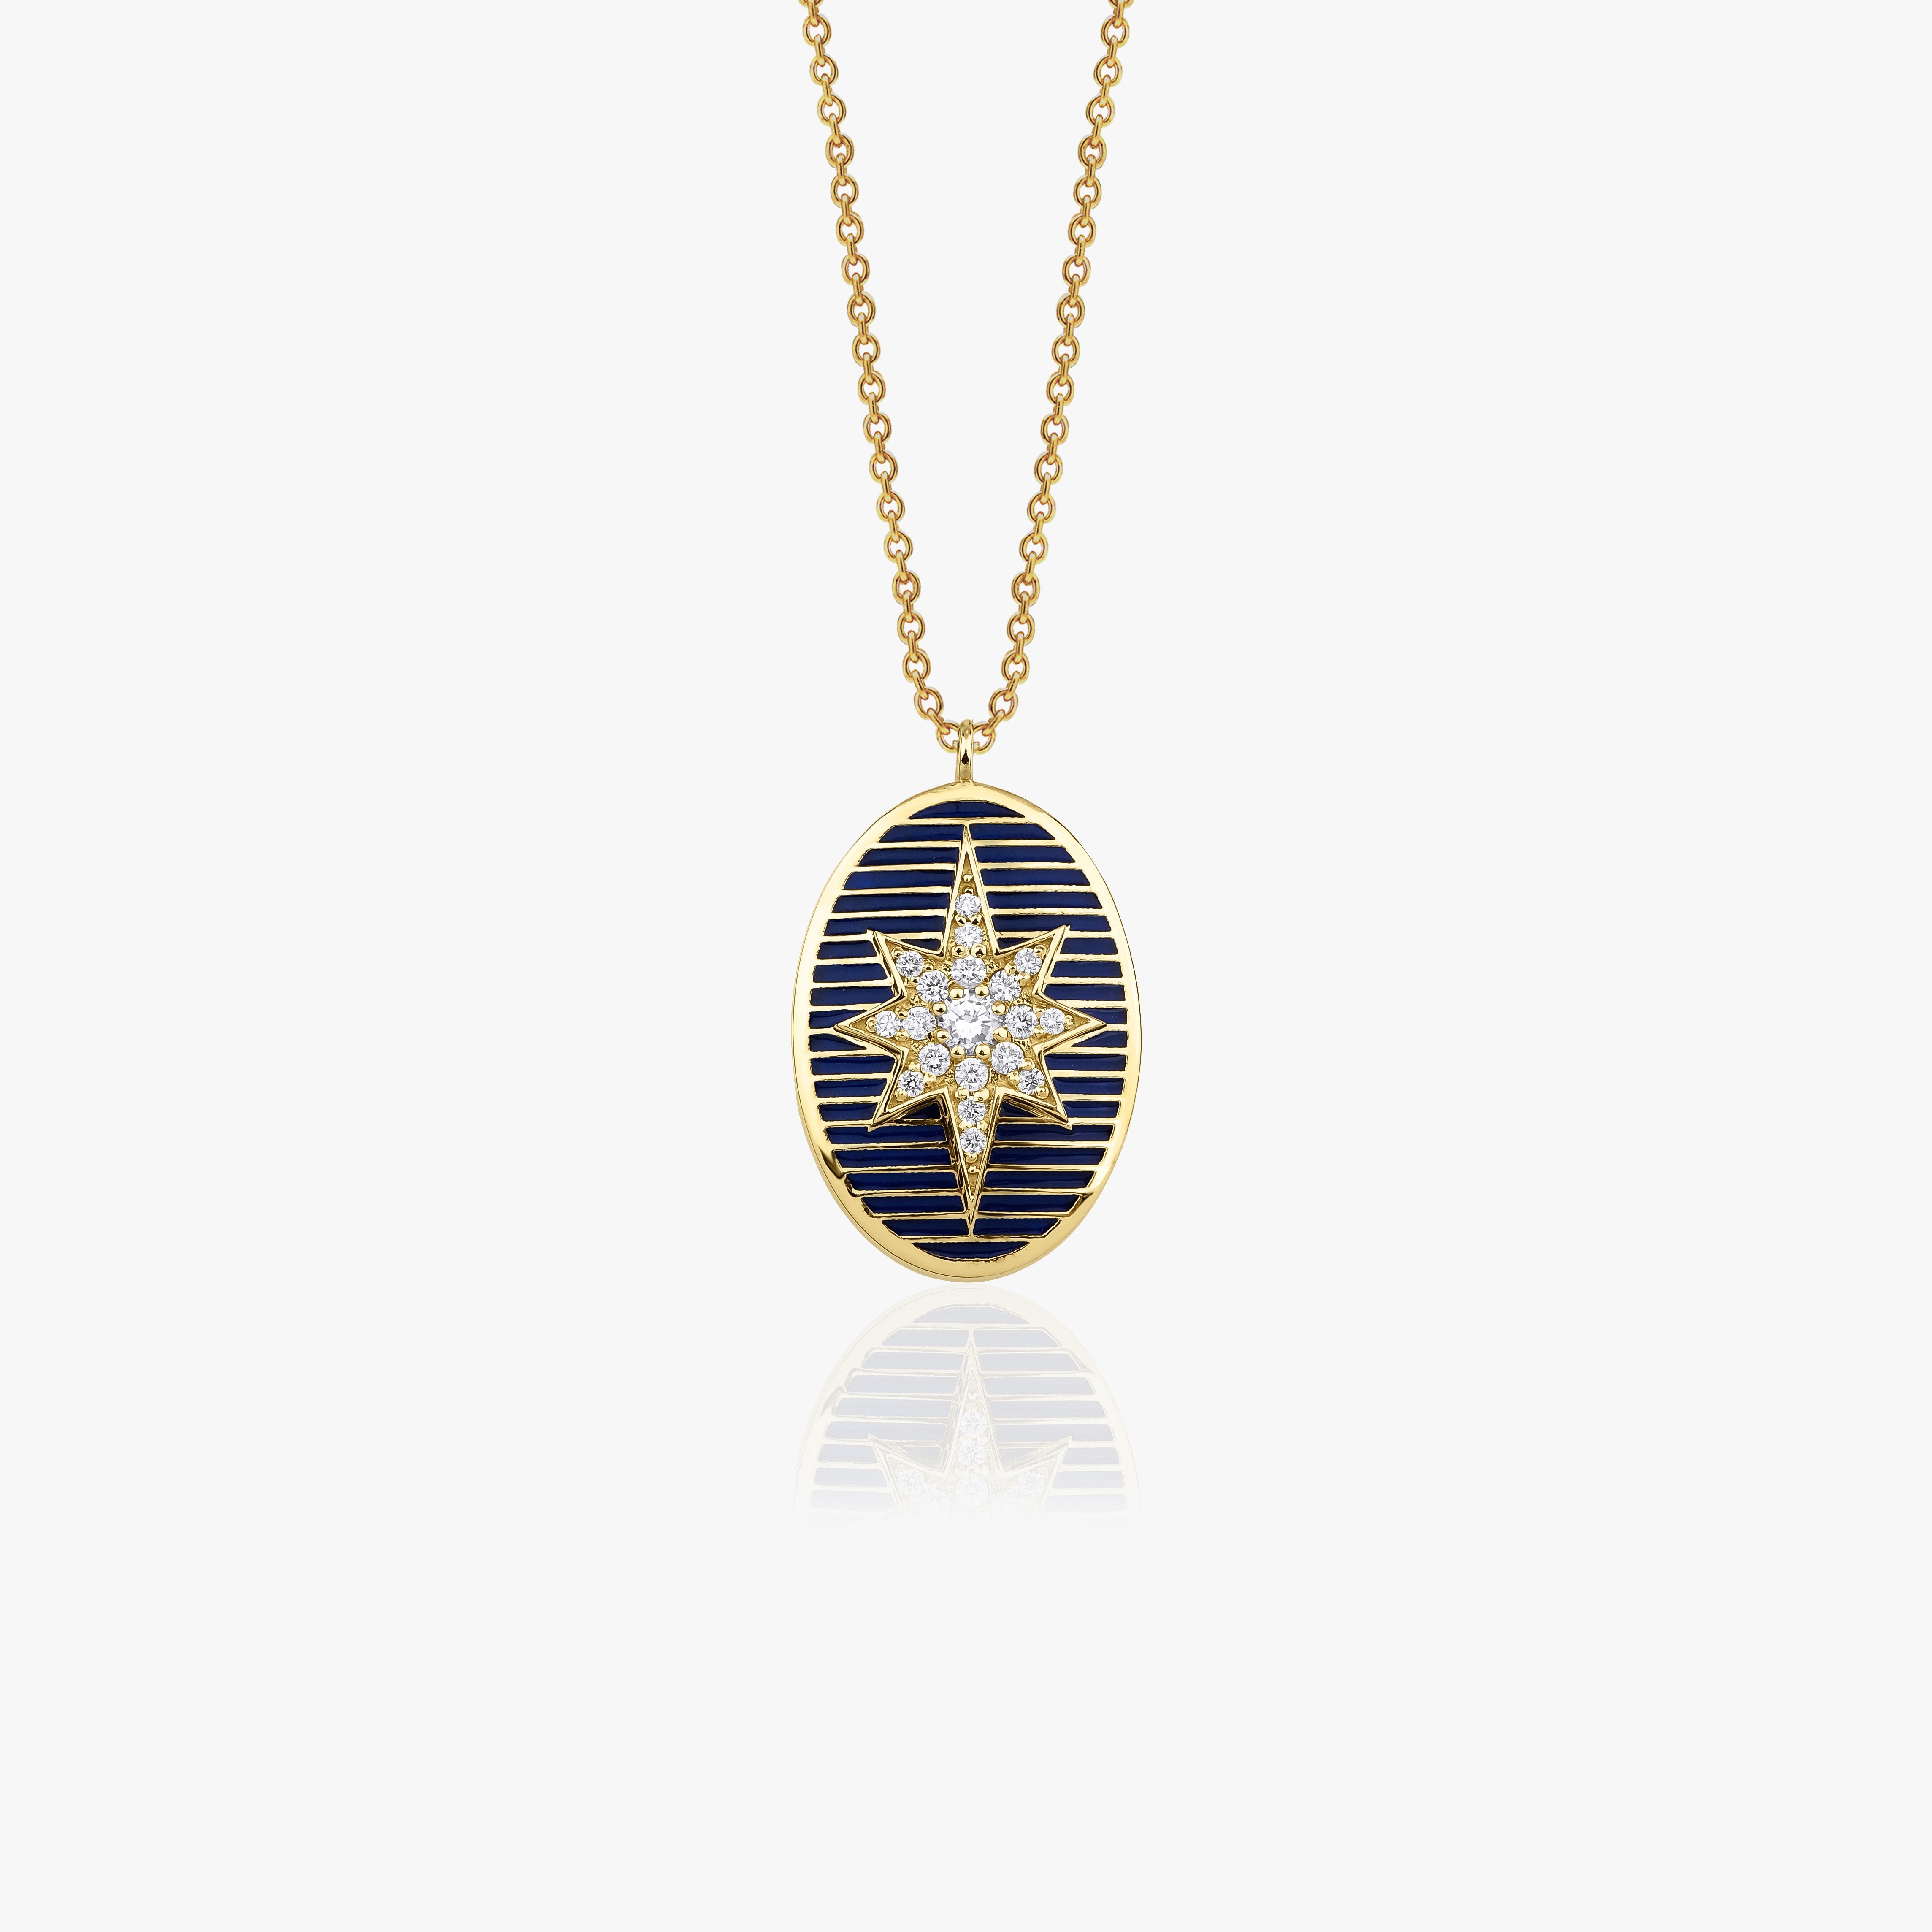 Diamond North Star Pendant Necklace Available in 14K and 18K Gold